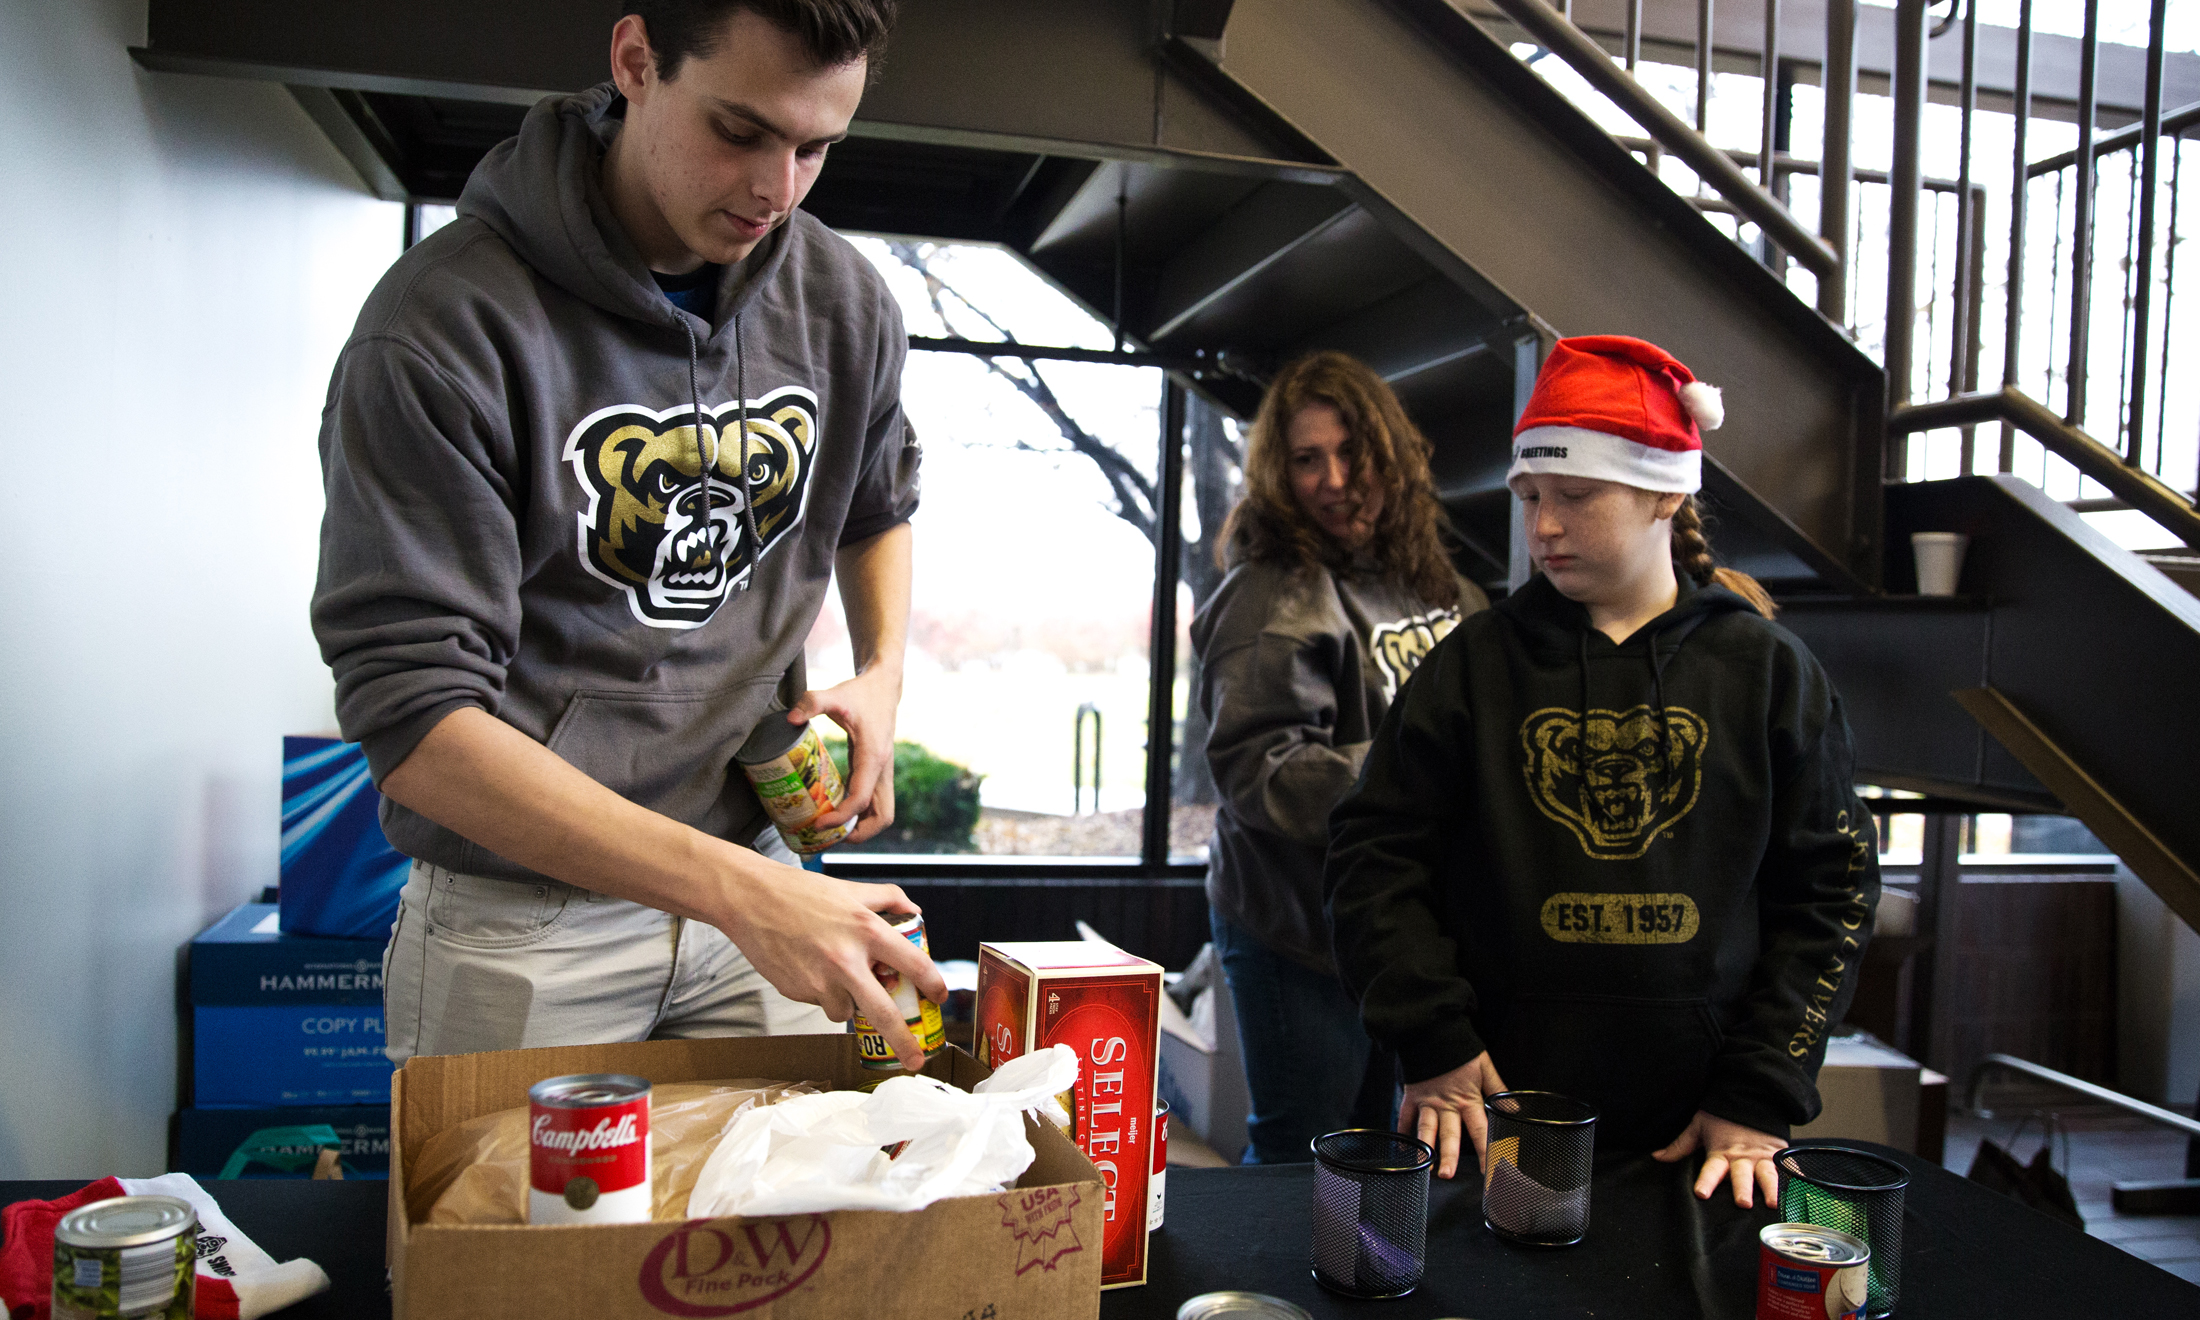 Oakland University student in gray sweatshirt with a golden grizzly head on the front hold cans of food at food drive in Macomb County